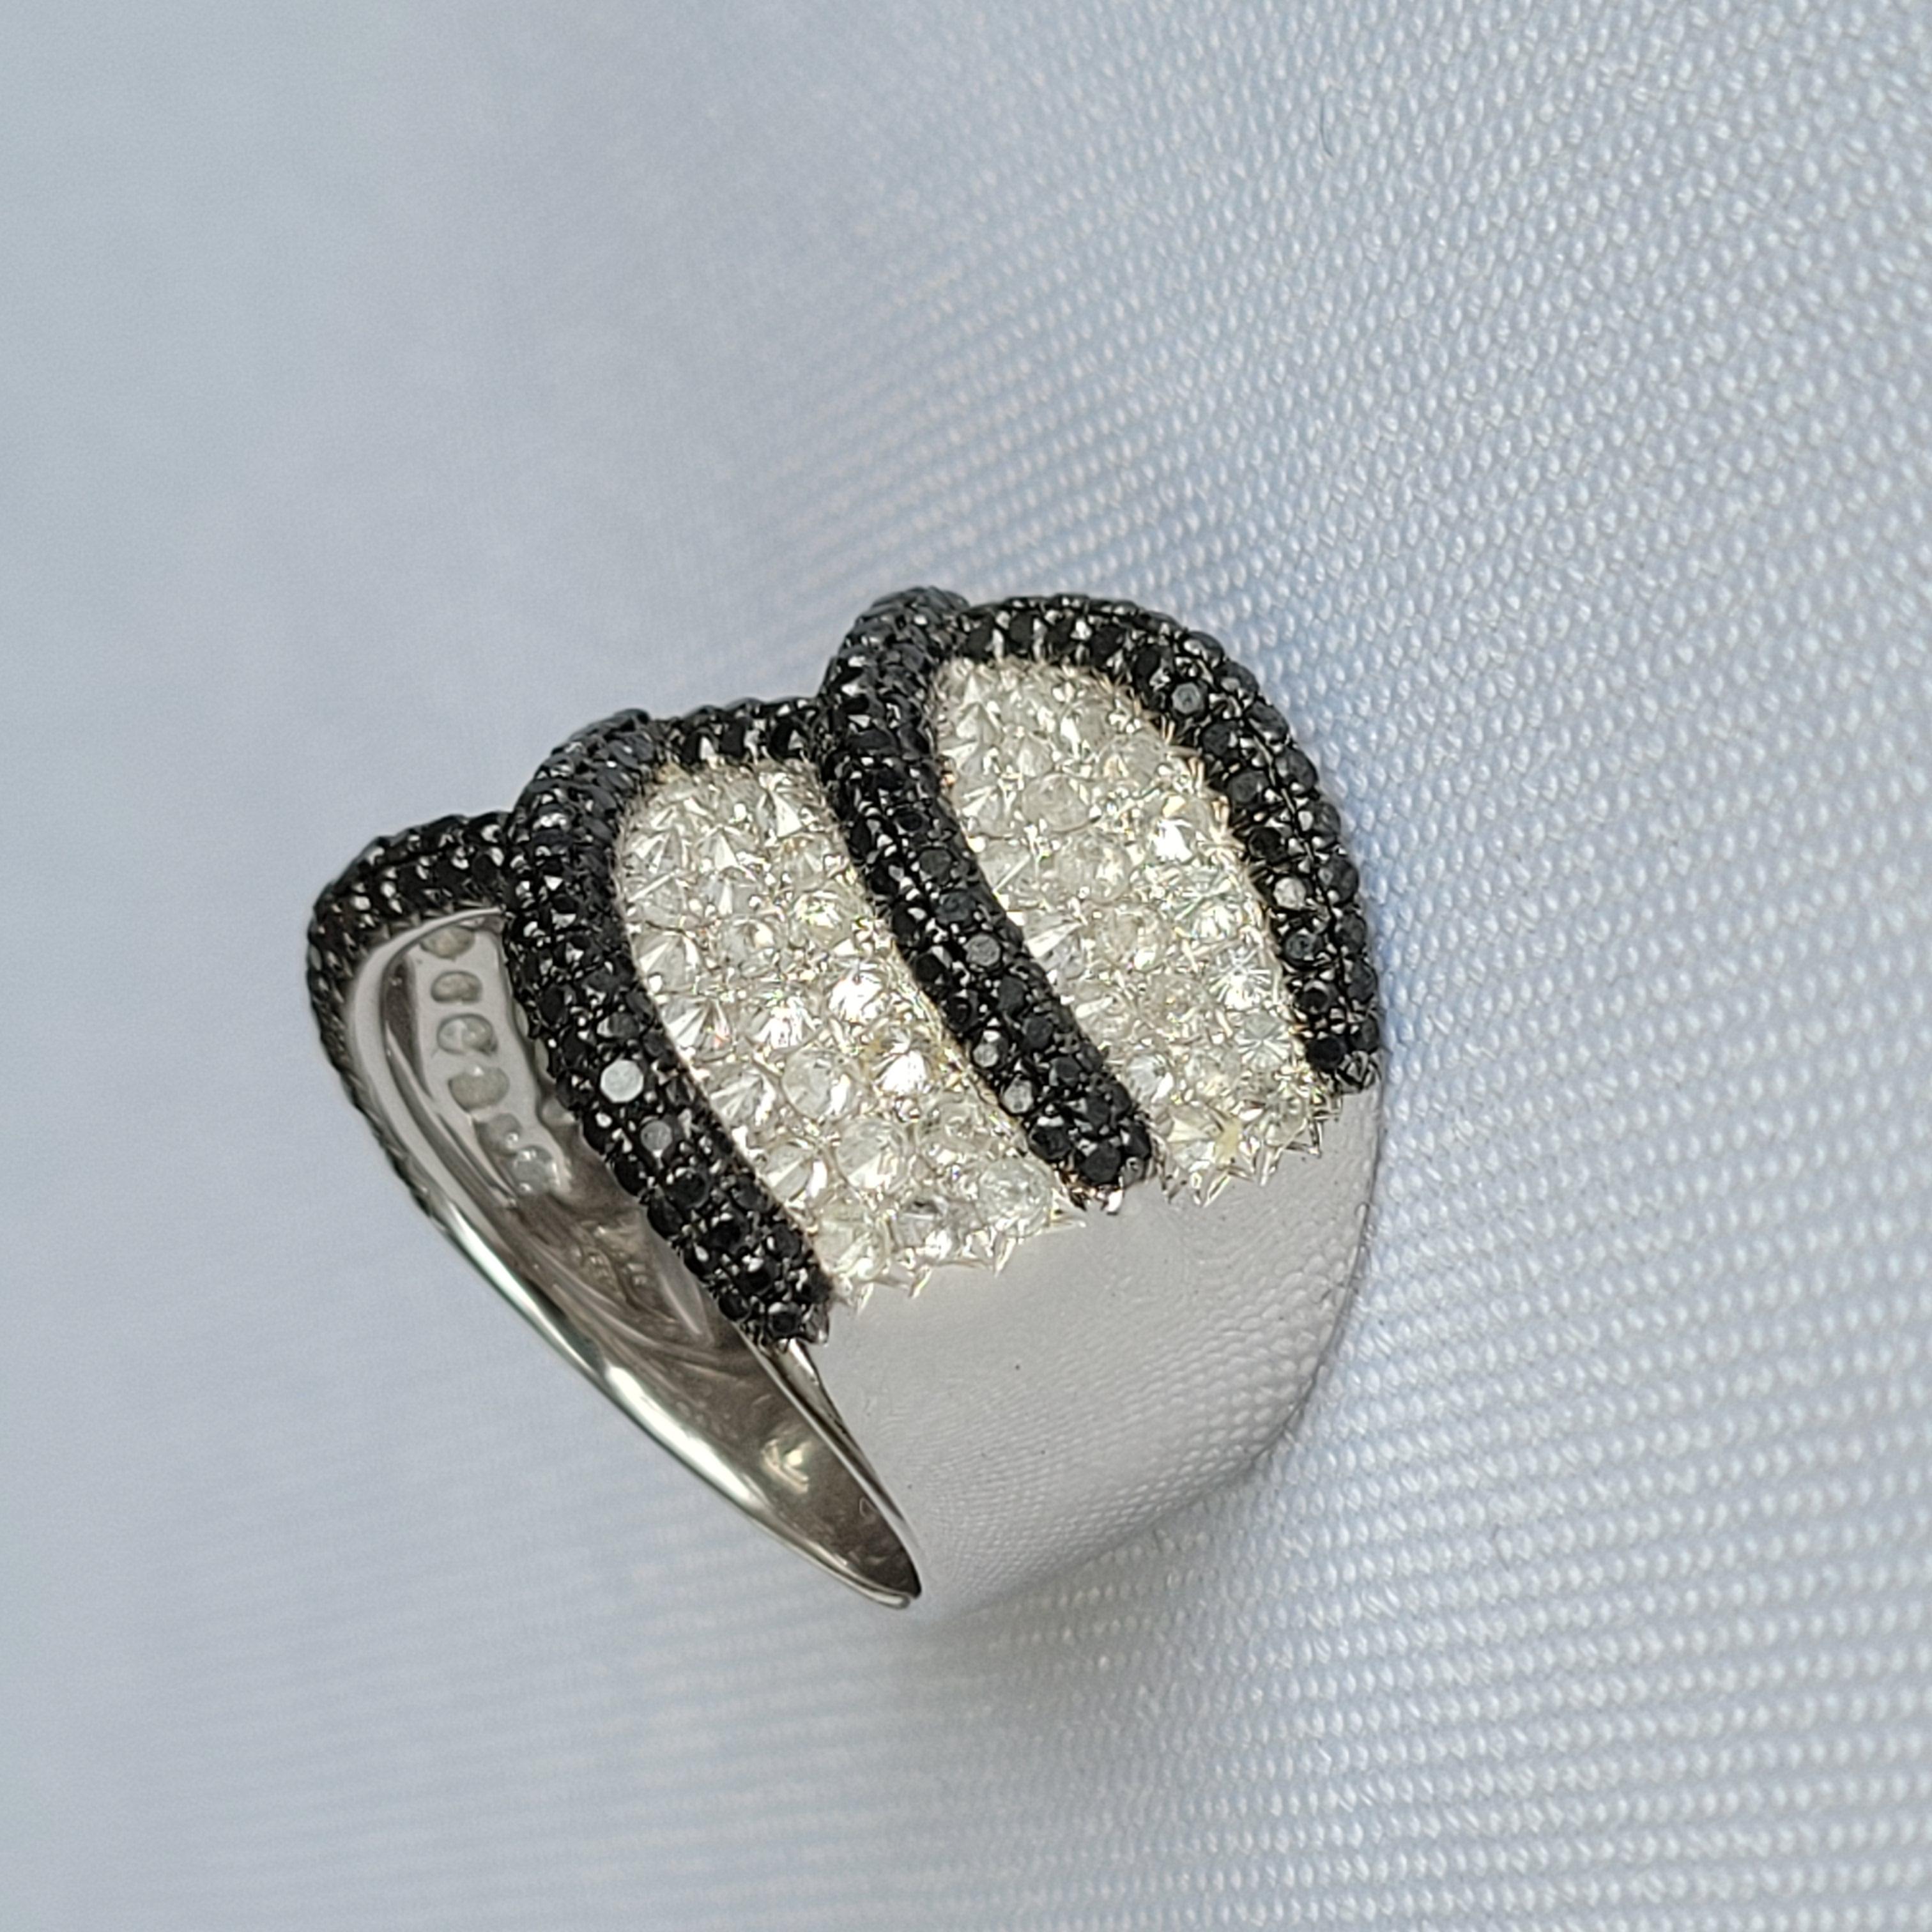 WHITE AND BLACK DIAMOND RING

this magnificent ring consist of 94 Round Diamonds approximately 1.7 ct, 
279 Black Diamonds - 1.7 ct
18 K 10.33 gr

Size 6.5 US